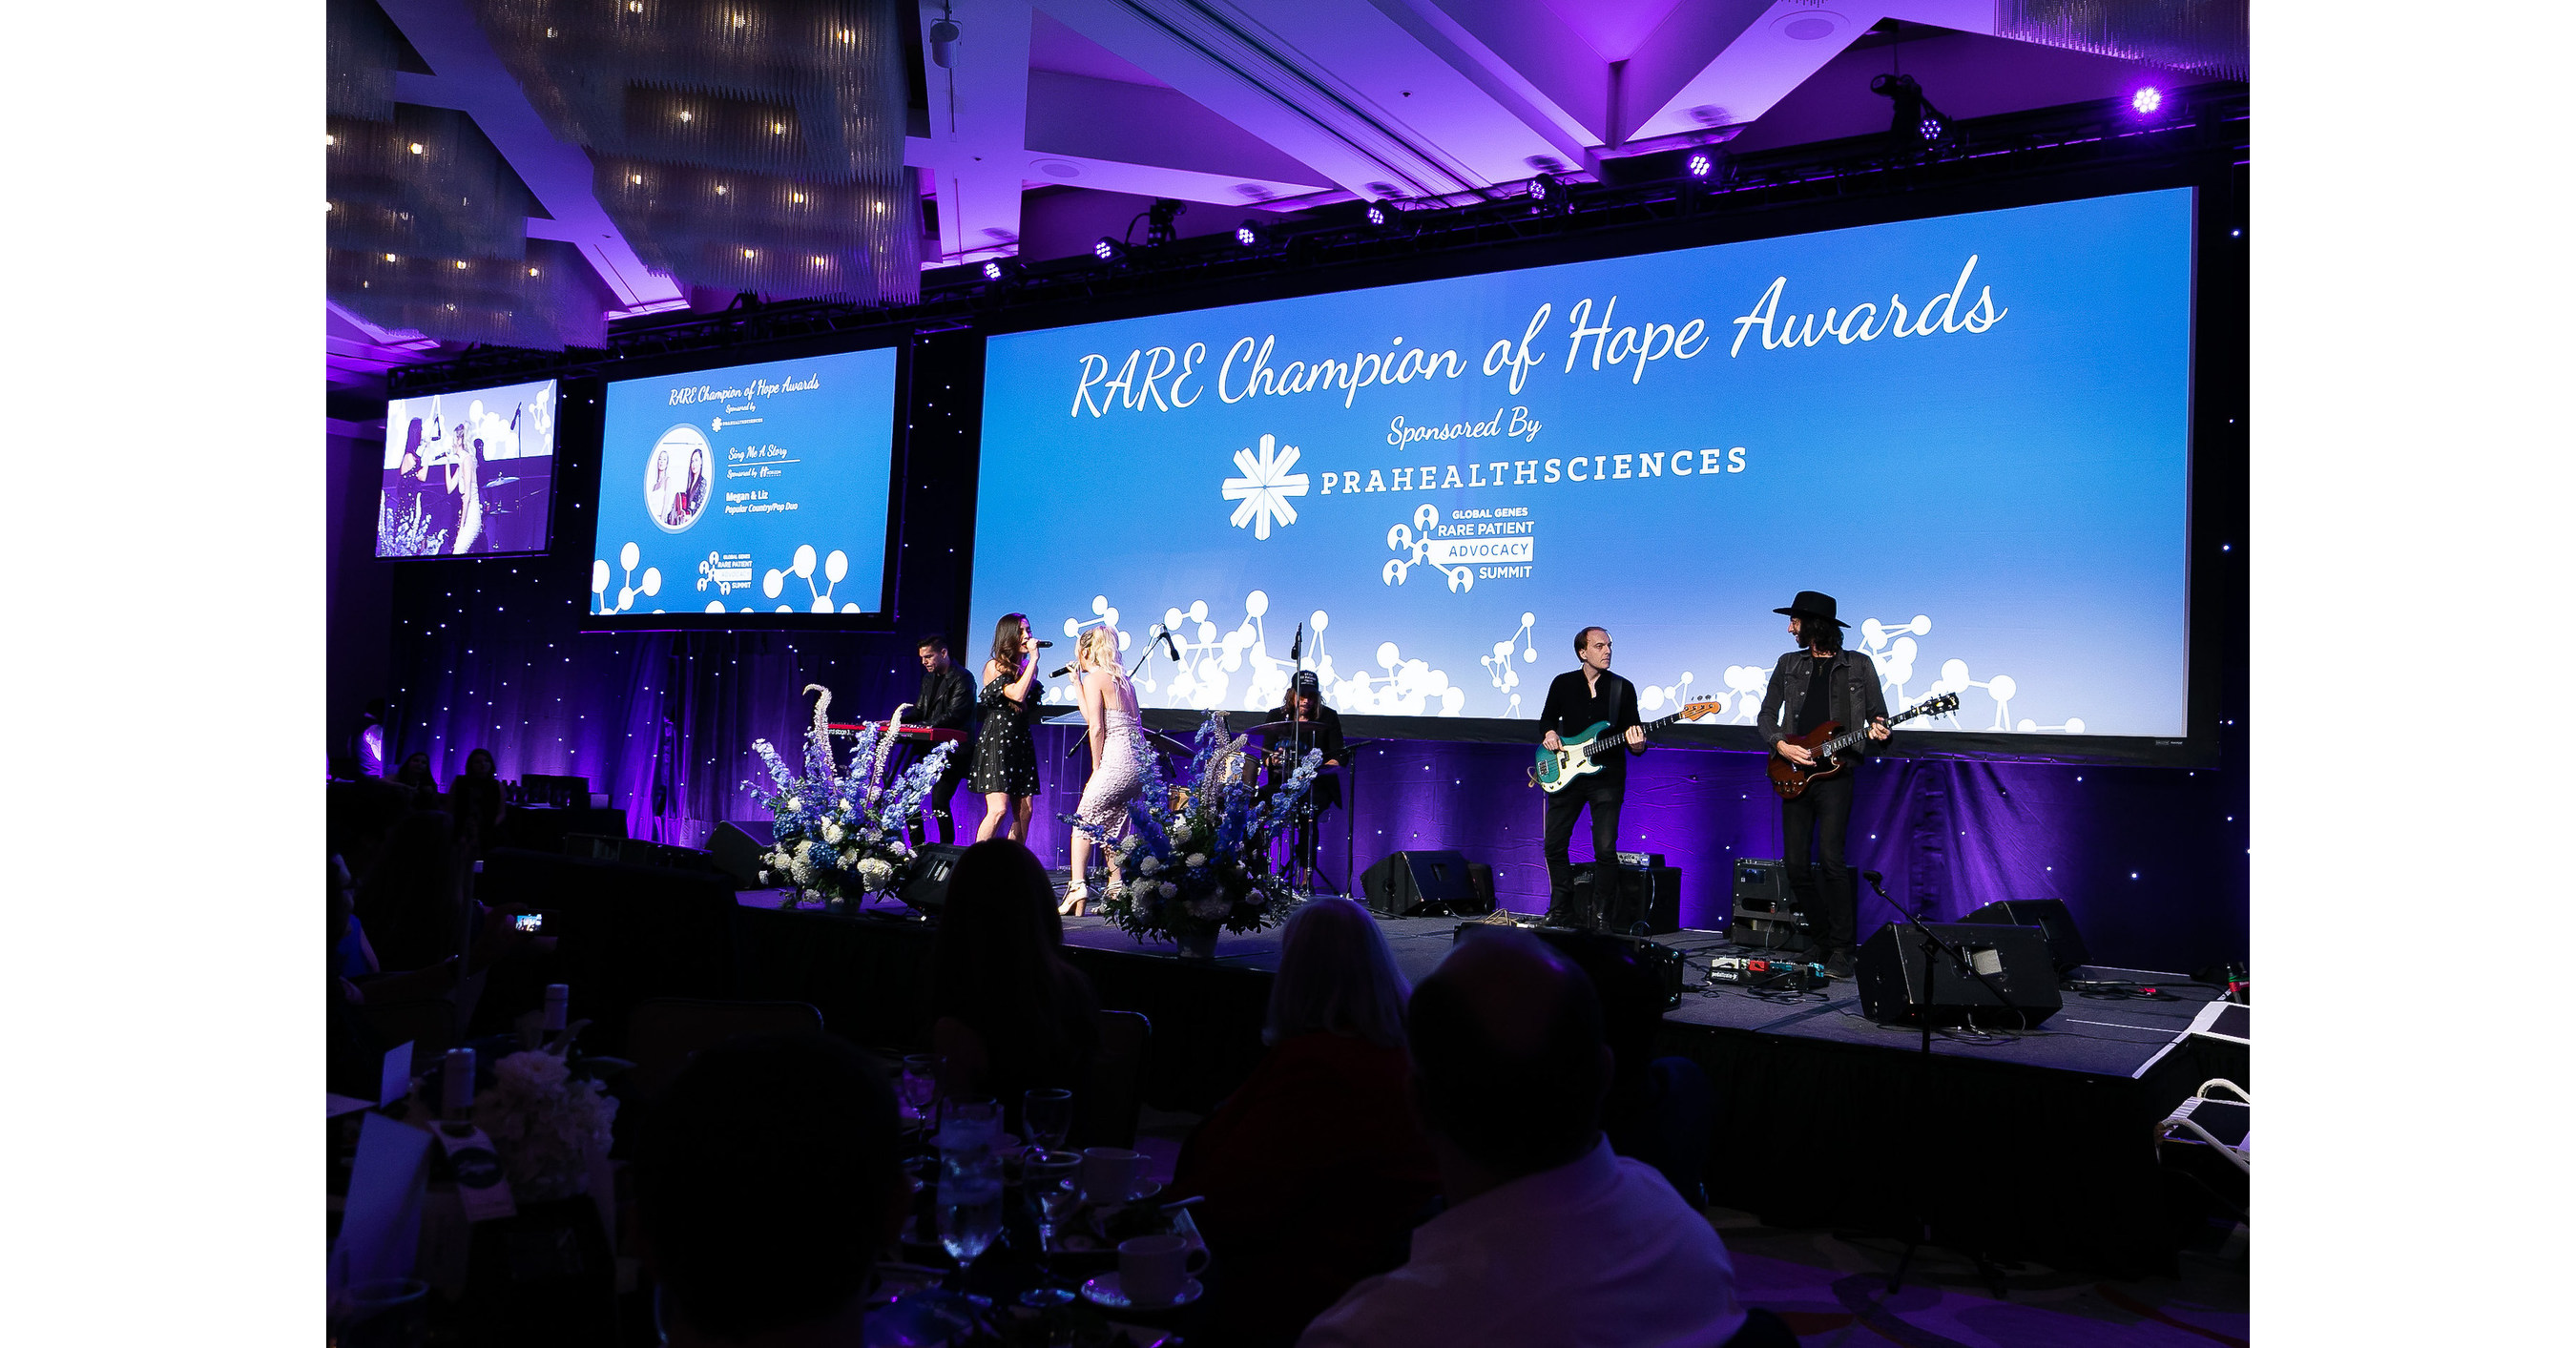 Disease Champions to be Honored at Global Genes' 8th RARE Champion of Hope